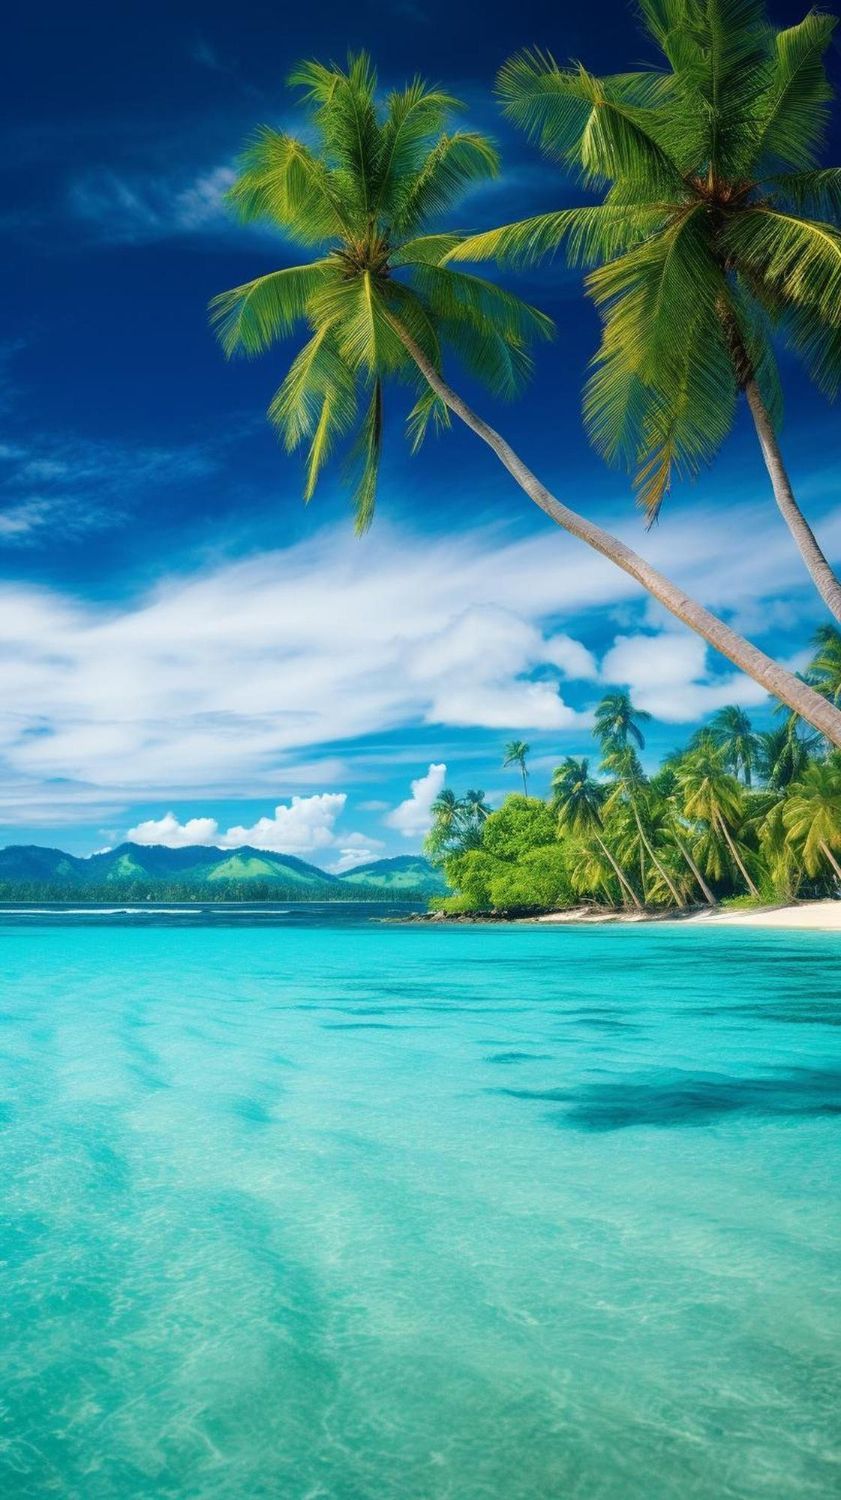 A tropical beach with palm trees and turquoise water